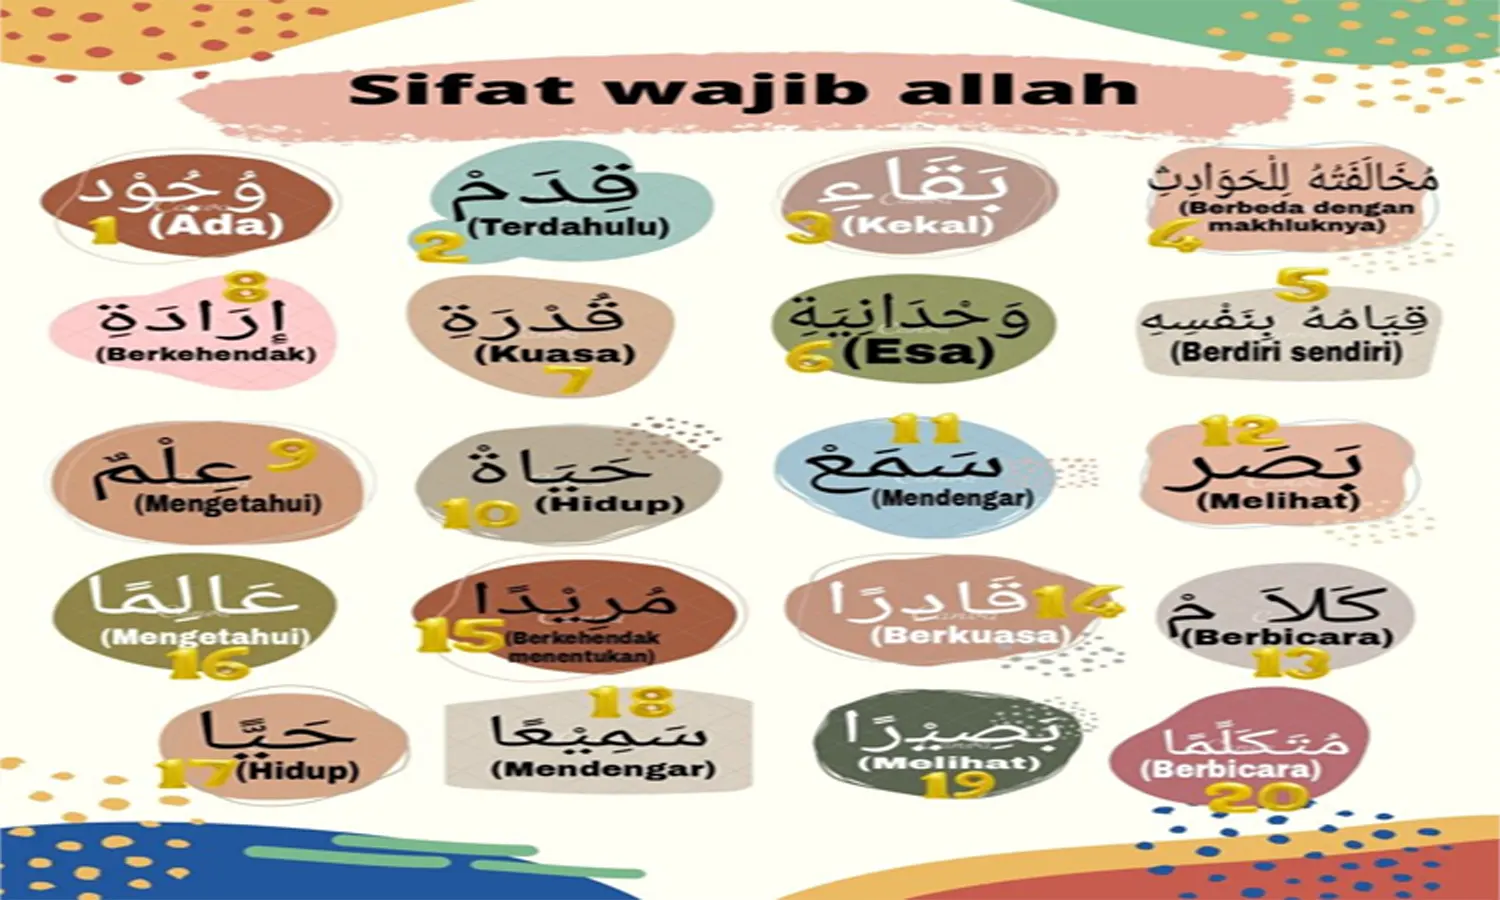 20 Mandatory Characteristics for Allah SWT, Complete Arabic Writing, Explanation, Proof and Classification